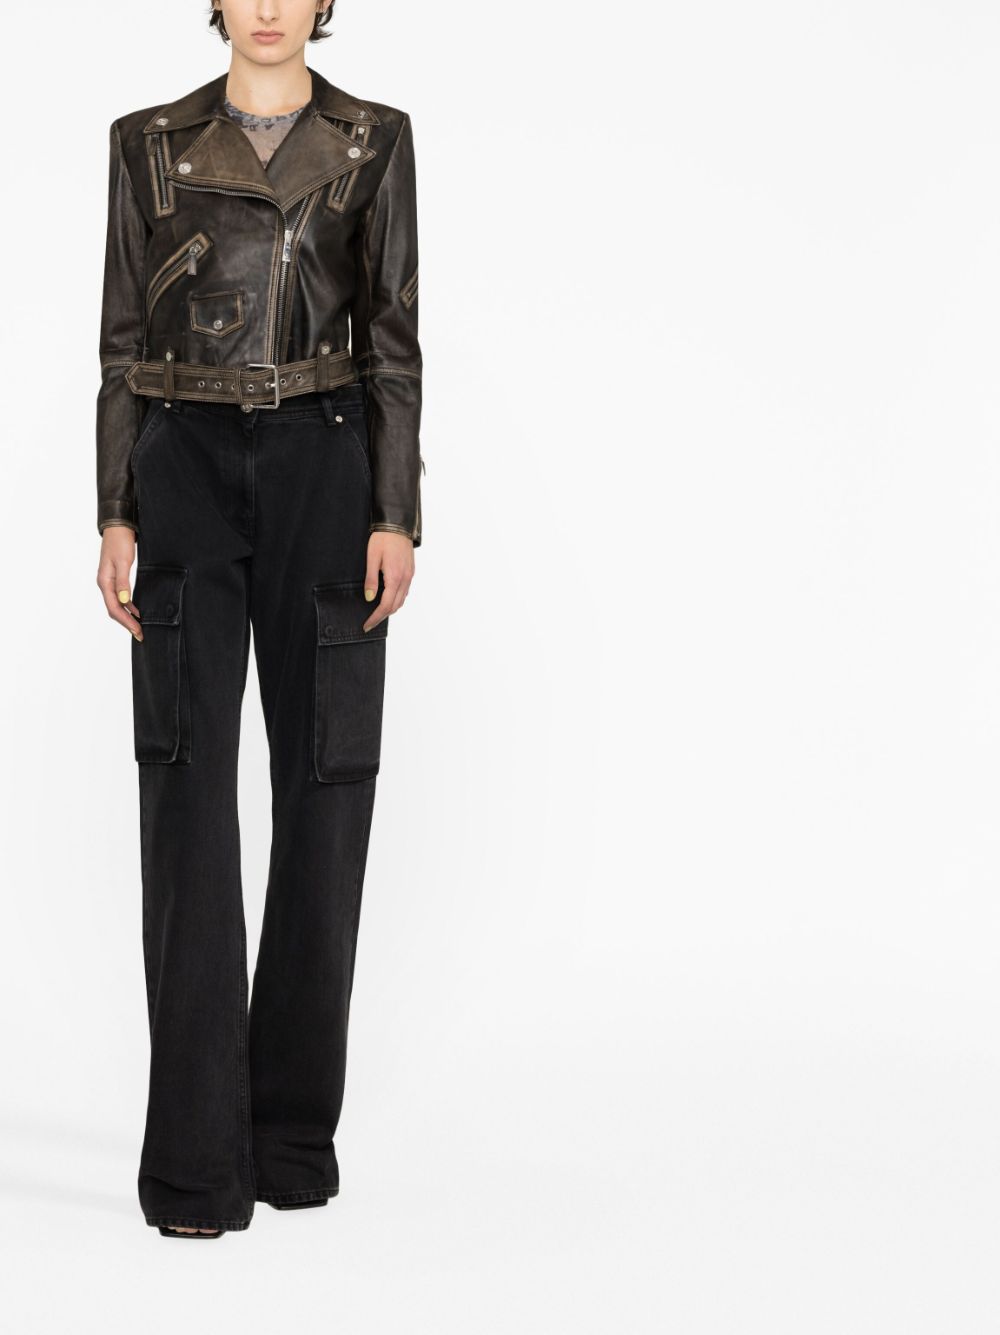 Versace Barocco Brushed Leather Jacket - Farfetch